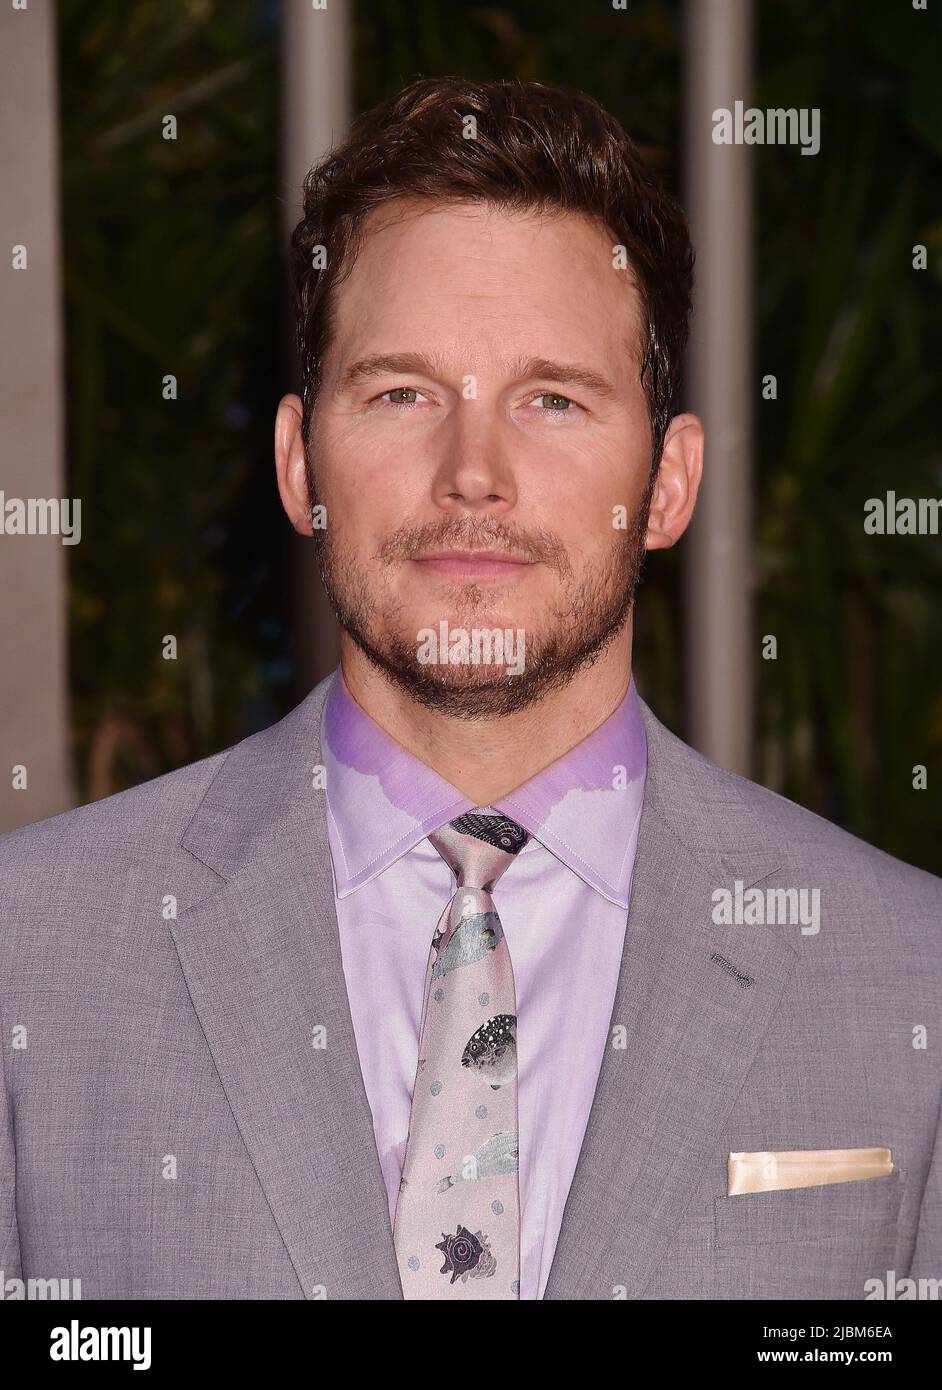 Hollywood, Ca. 06th June, 2022. Chris Pratt attends the Los Angeles premiere of Universal Pictures' 'Jurassic World Dominion' at the TCL Chinese Theatre on June 06, 2022 in Hollywood, California. Credit: Jeffrey Mayer/Jtm Photos/Media Punch/Alamy Live News Stock Photo